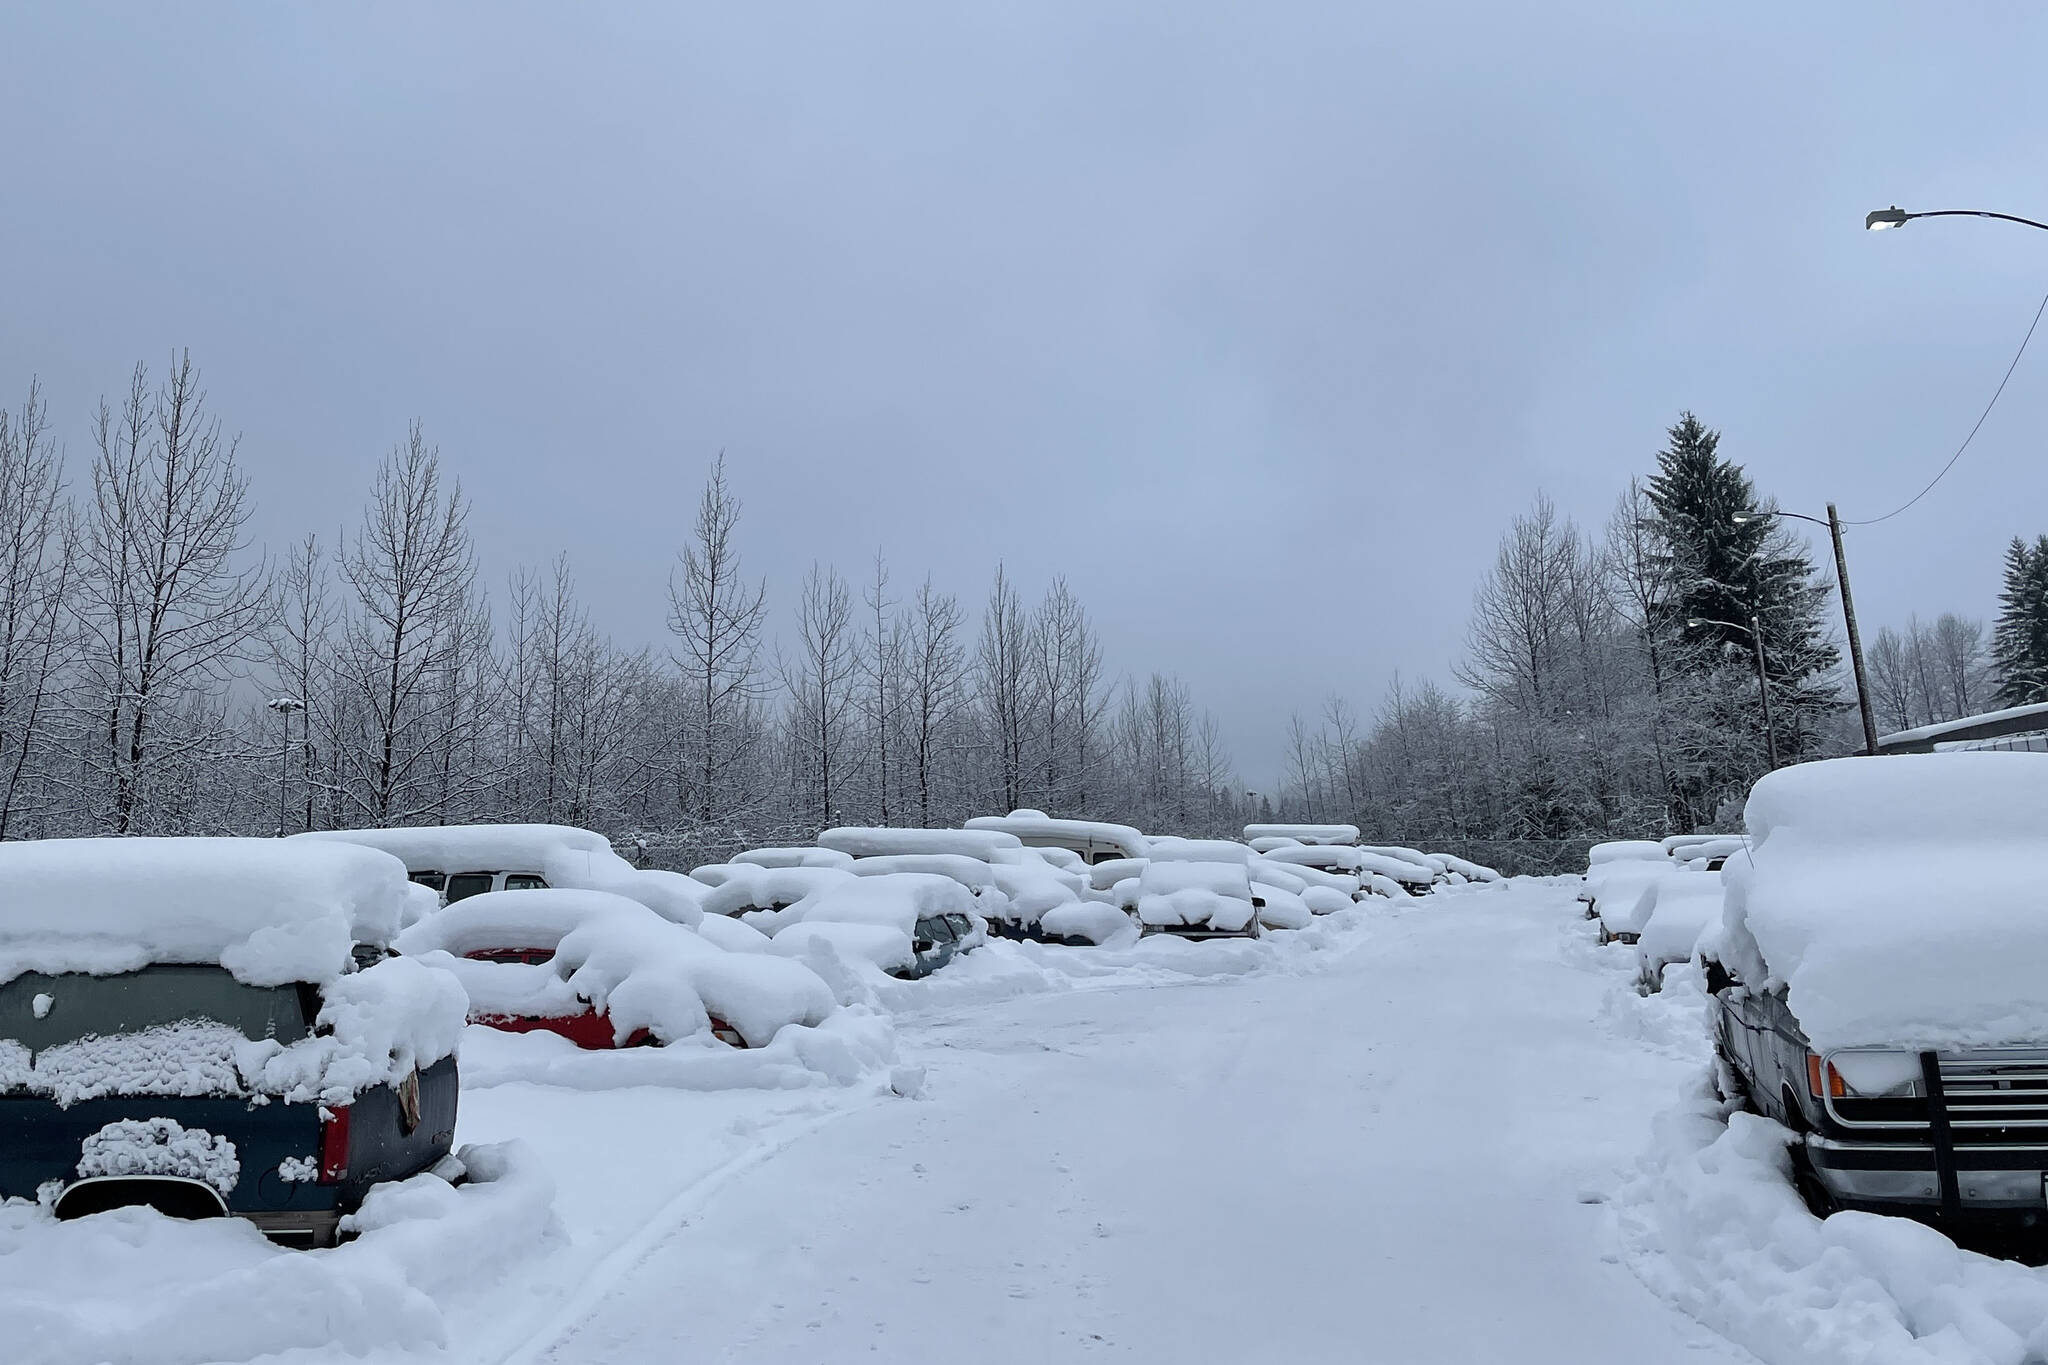 Michael S. Lockett / Juneau Empire
This photo shows vehicles at the city impound lot in Lemon Creek on Dec. 9, 2021. Space is perpetually at a premium in the impound lot, which holds vehicles for all sorts of reasons.